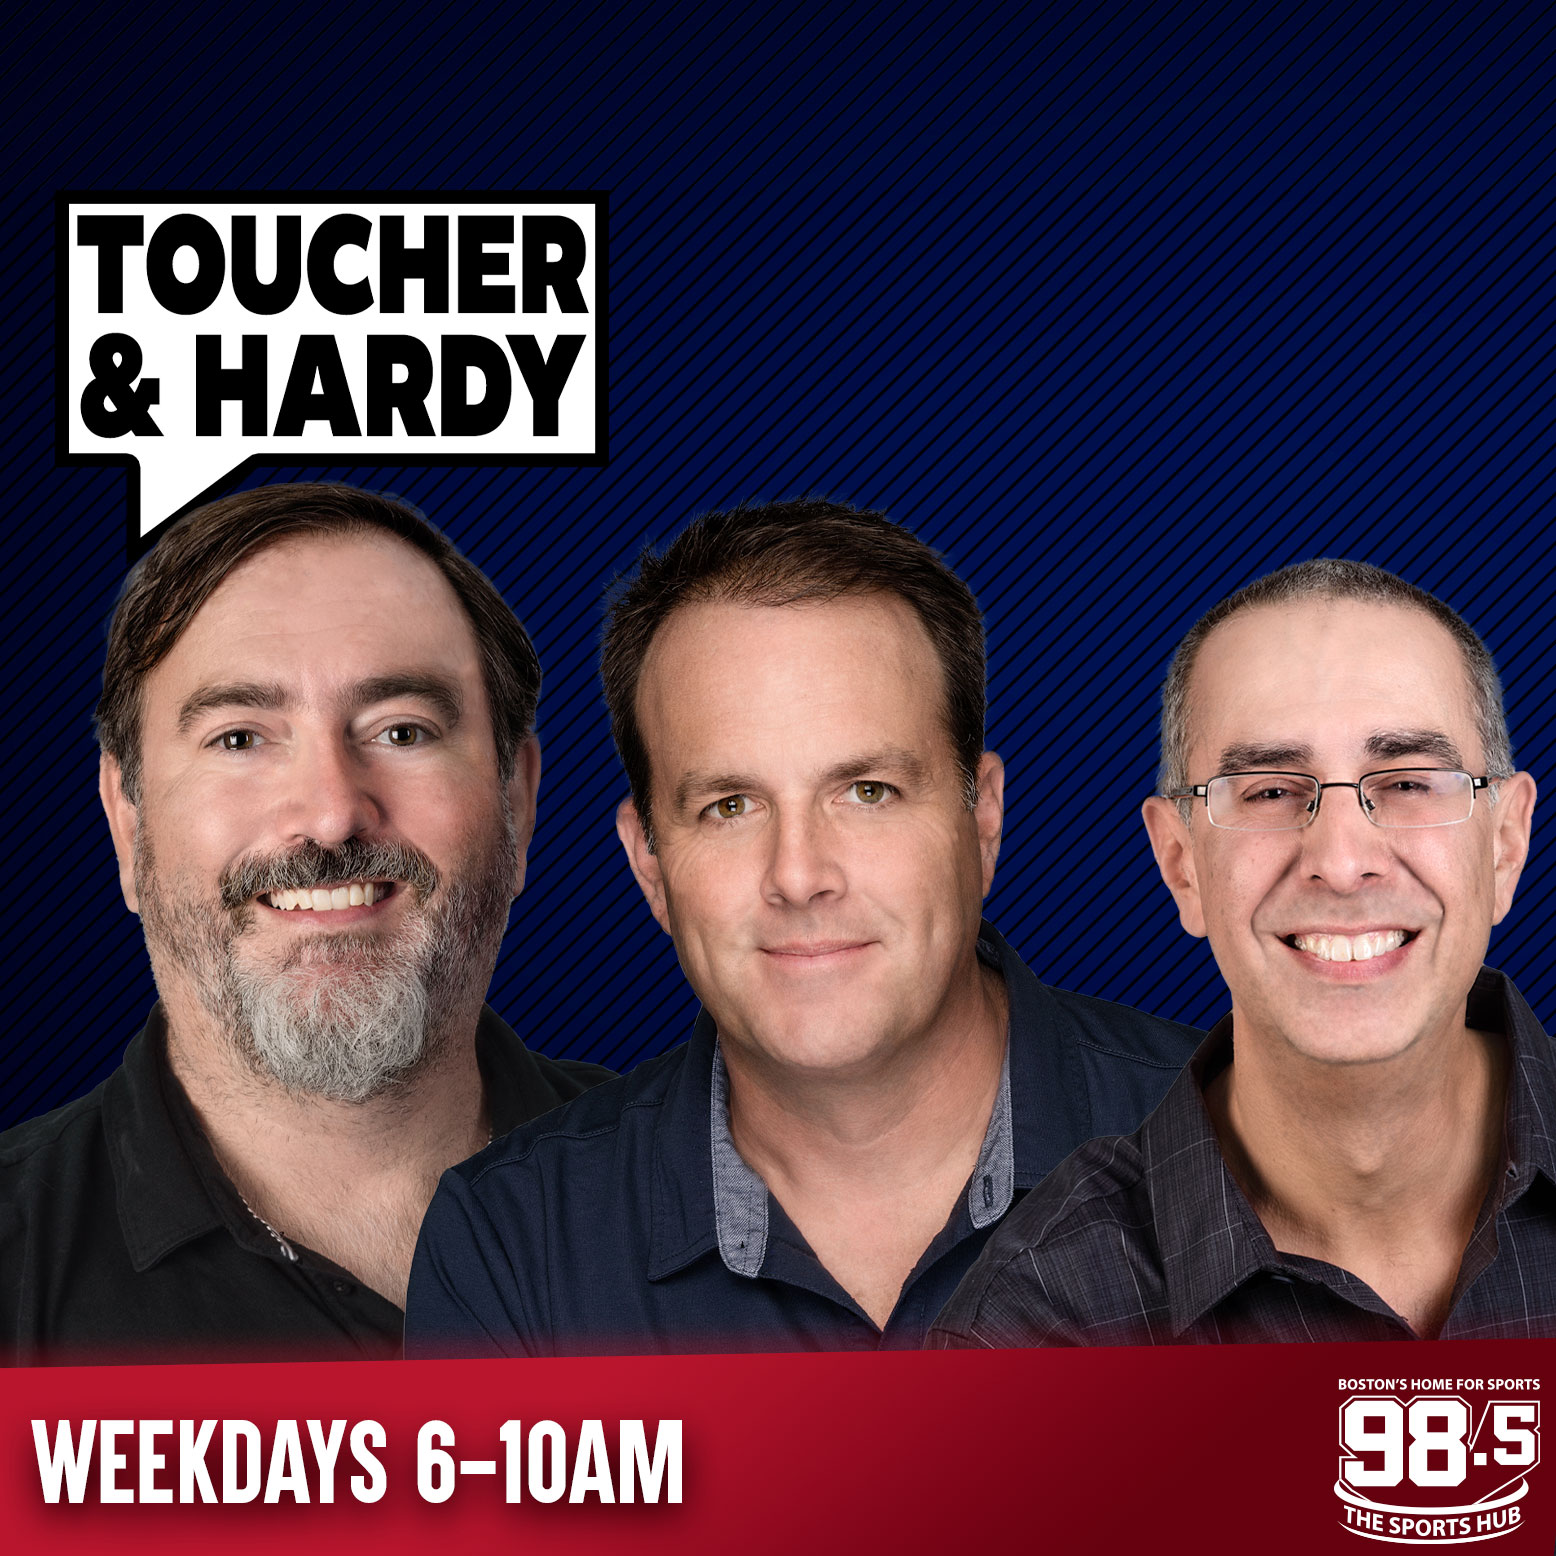 Bruins Win Series, Advance to Round 2 // Phil Mickelson Wins PGA Championship // Chara’s future? - 5/24 (Hour 1)